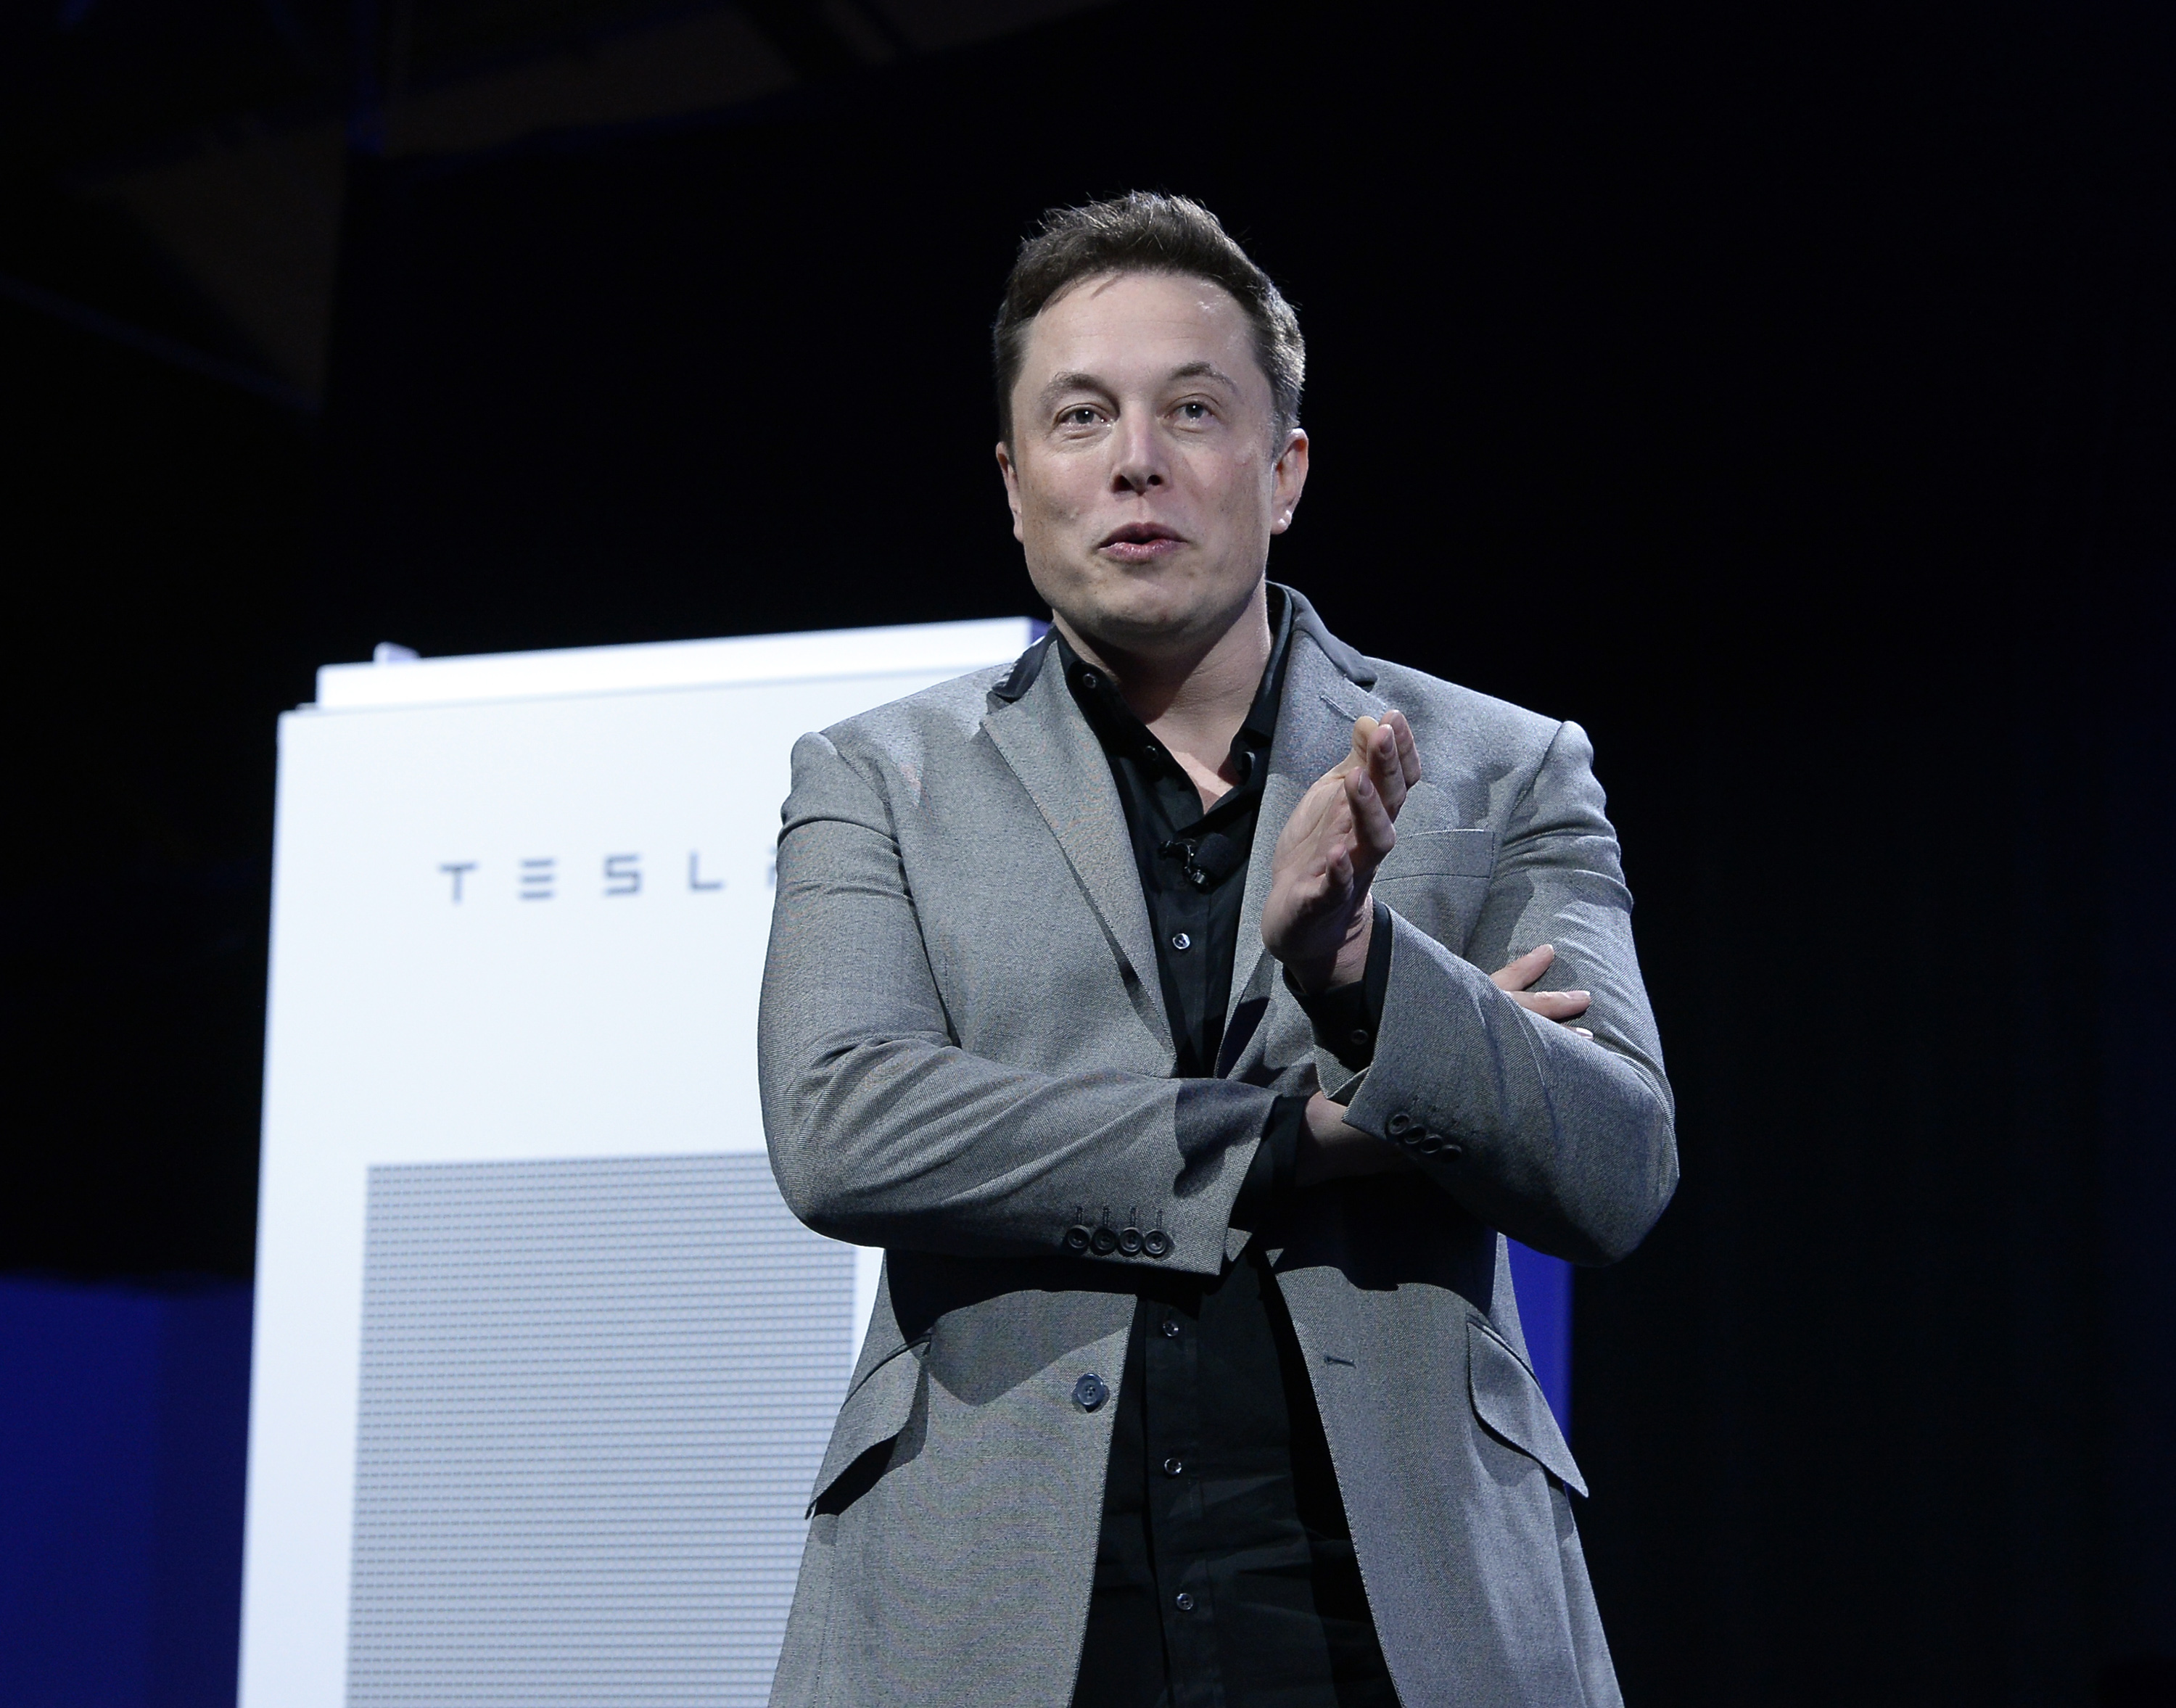 Carry To jump Incredible Elon Musk Says Sustainable Energy Is The Most Important Issue For  Scientists To Tackle Next & He's Already Got A Few Ideas